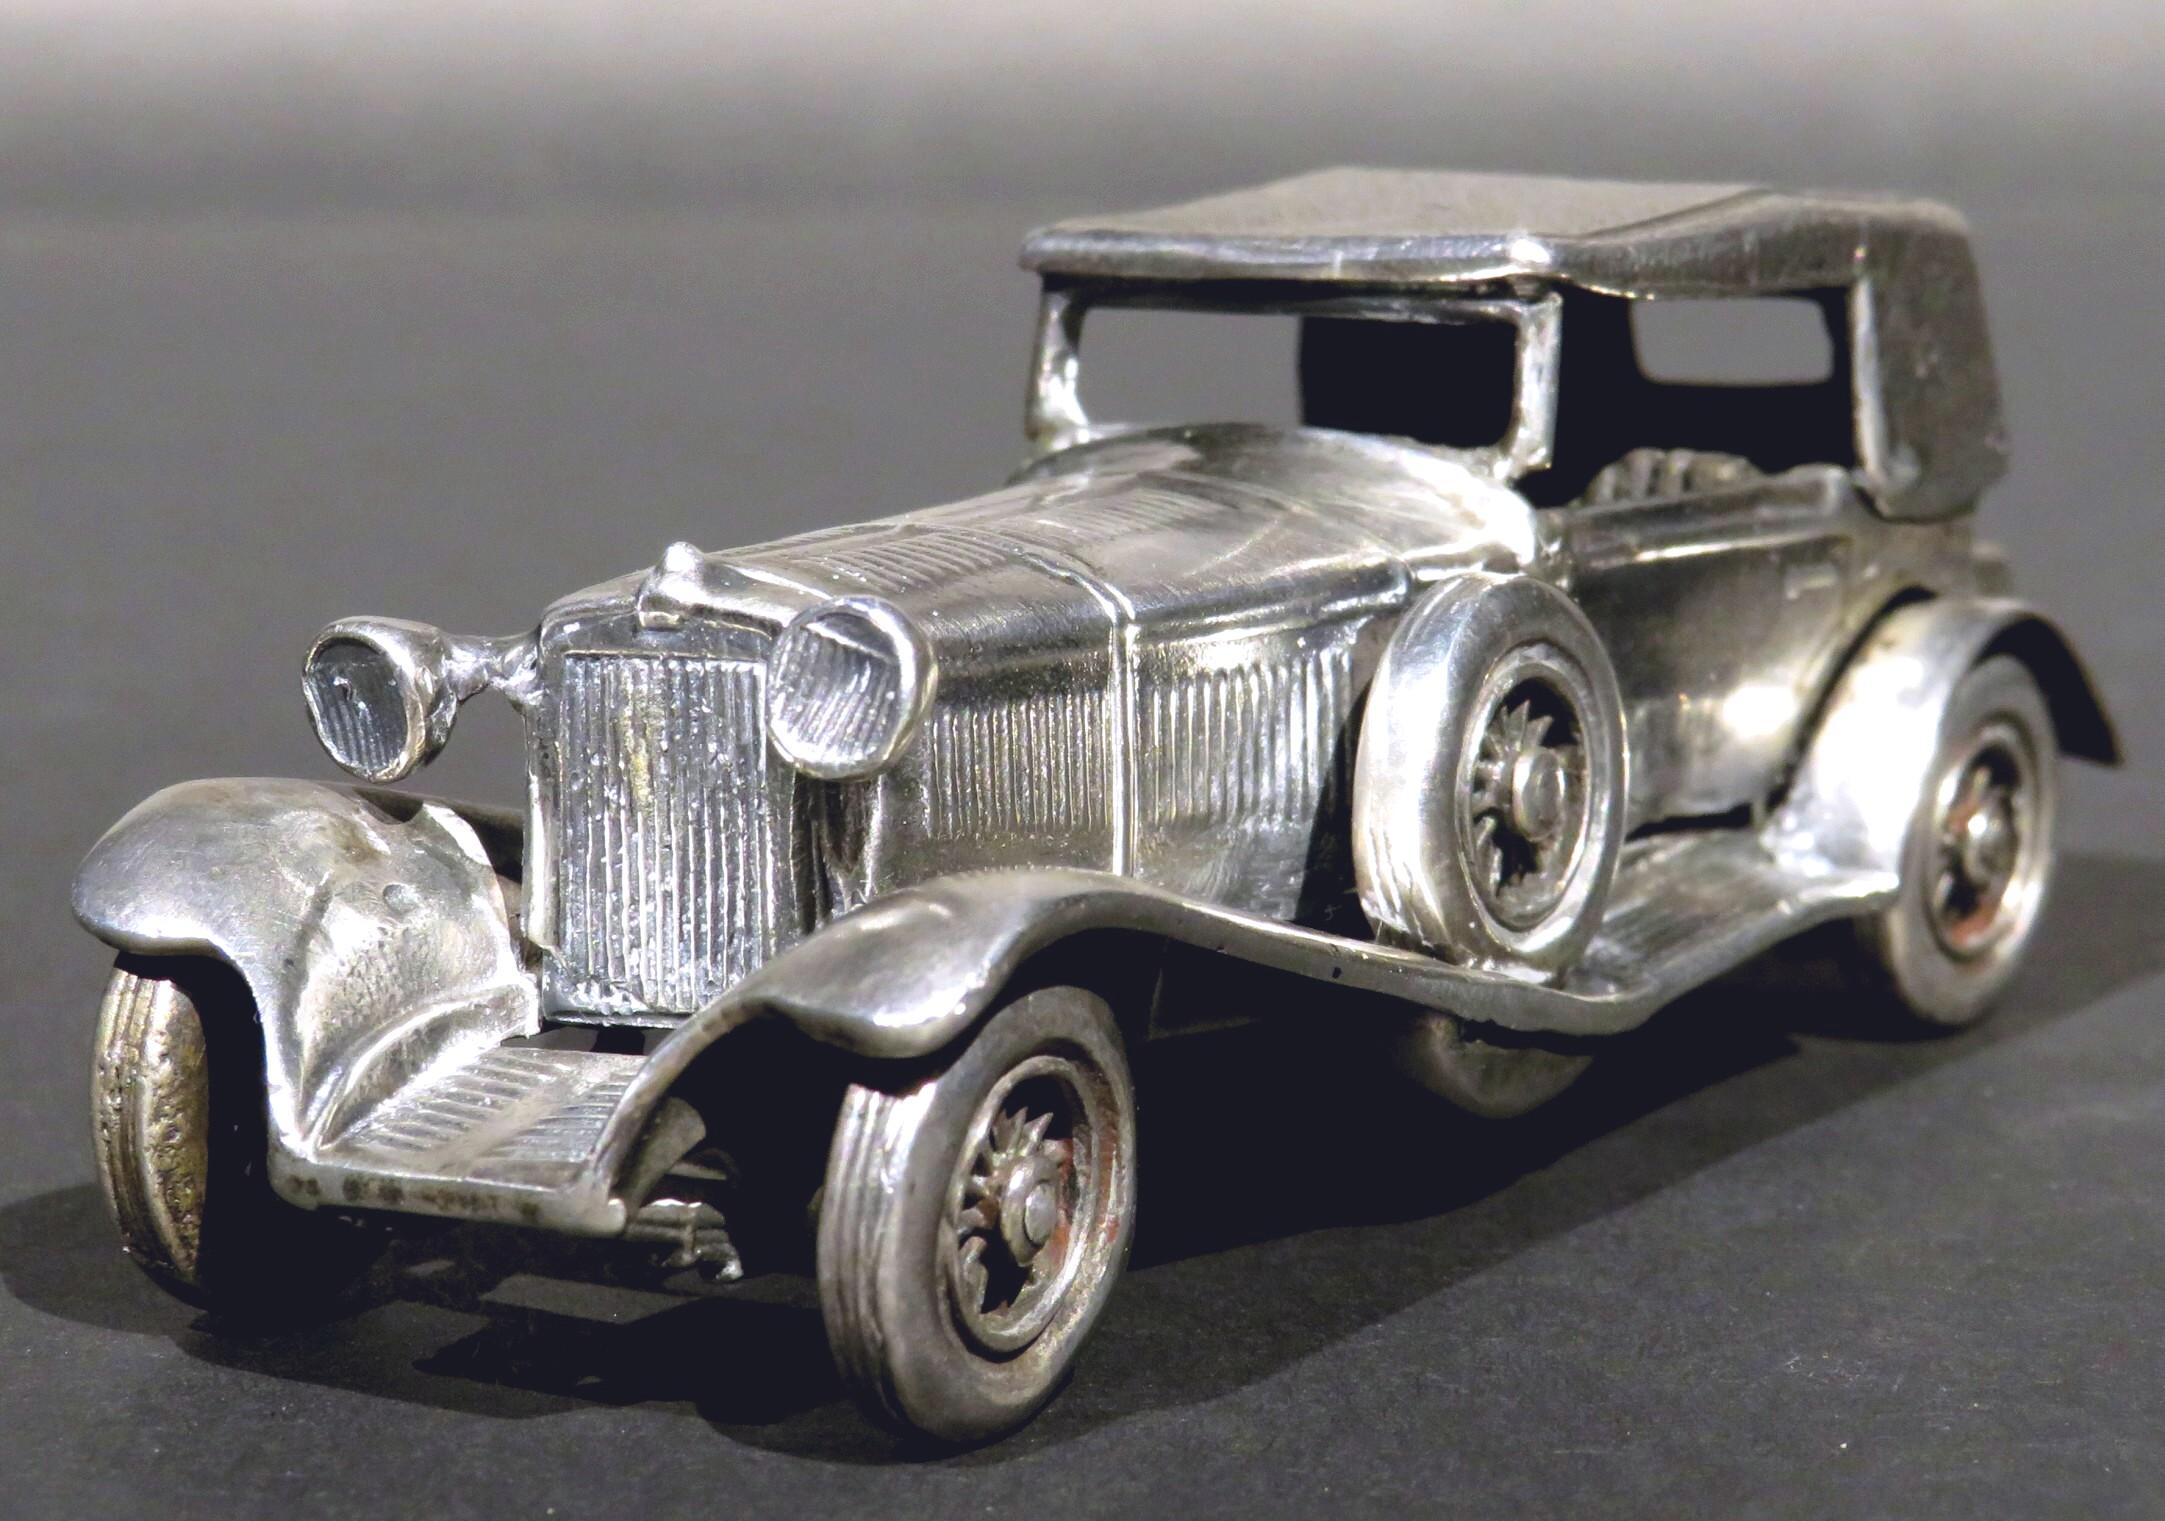 A rare scale model of the classic 1928 Mercedes Benz SS (Super Sport) which was the fastest car of its time. Made entirely of solid silver, the chassis shows a vented & belted hood, rotating wheels, ‘bug eye’ headlights, reeded running boards, a